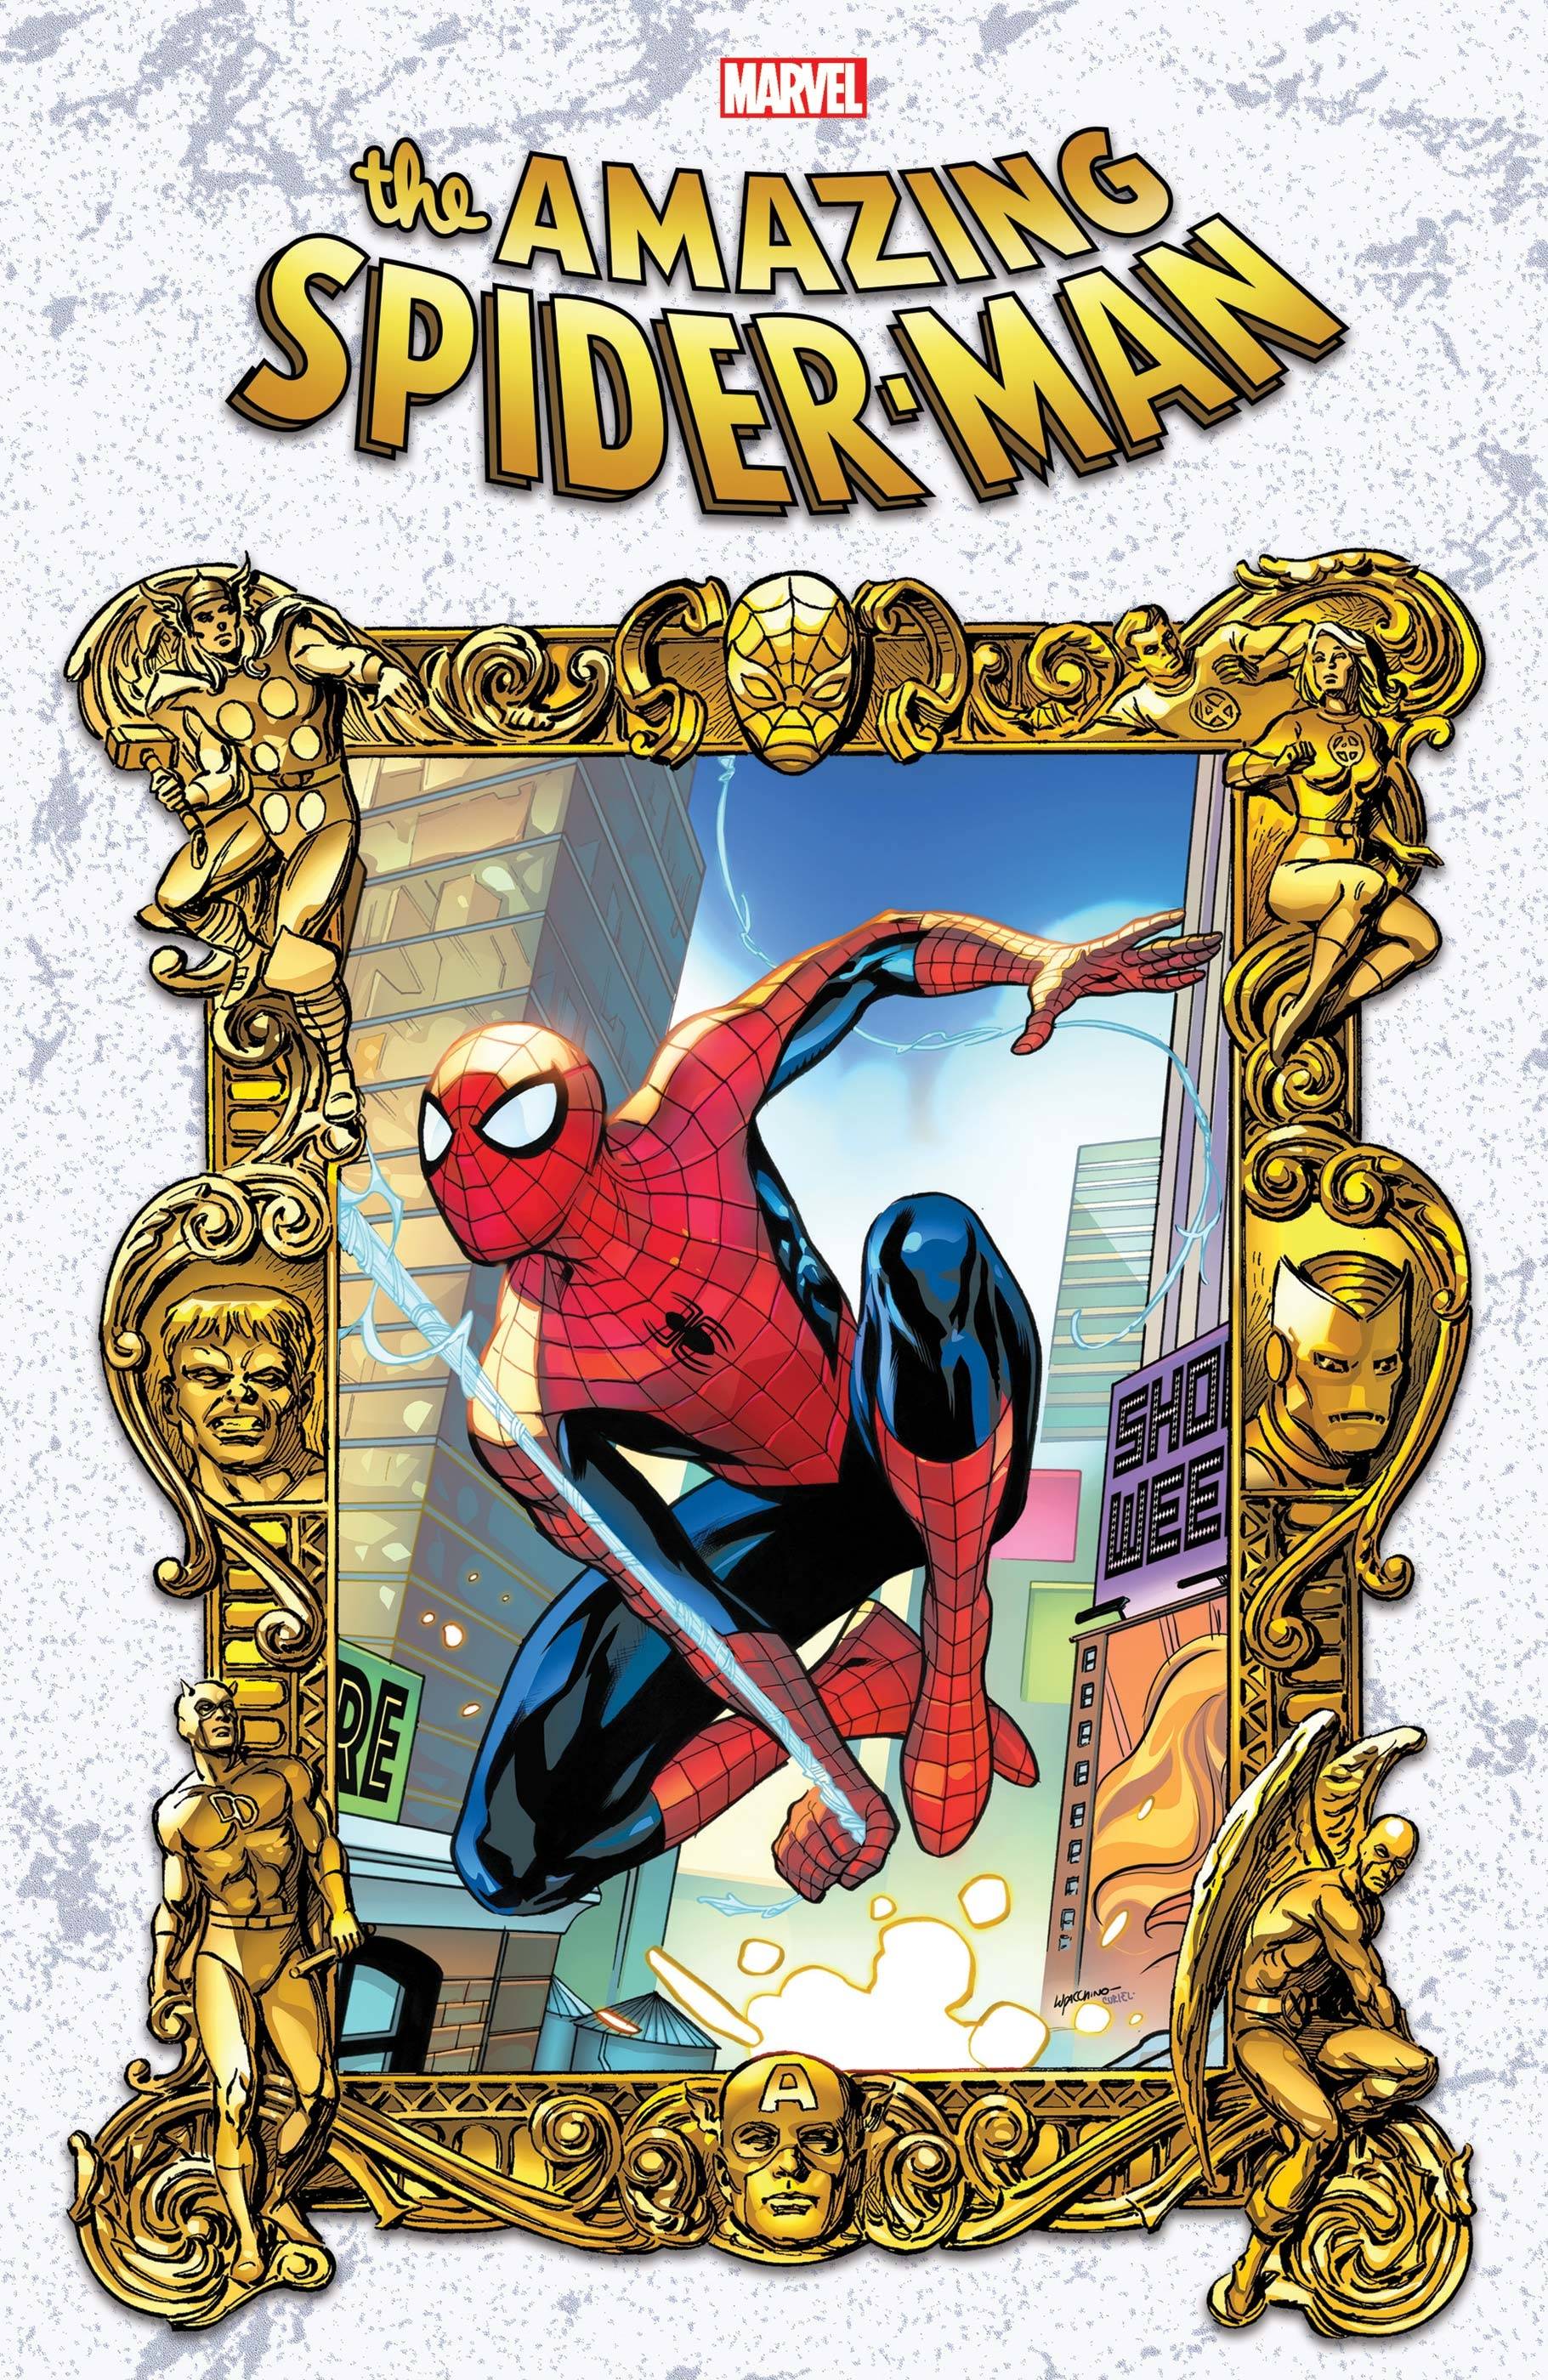 Amazing Spider-Man 59 - Heroes Cave